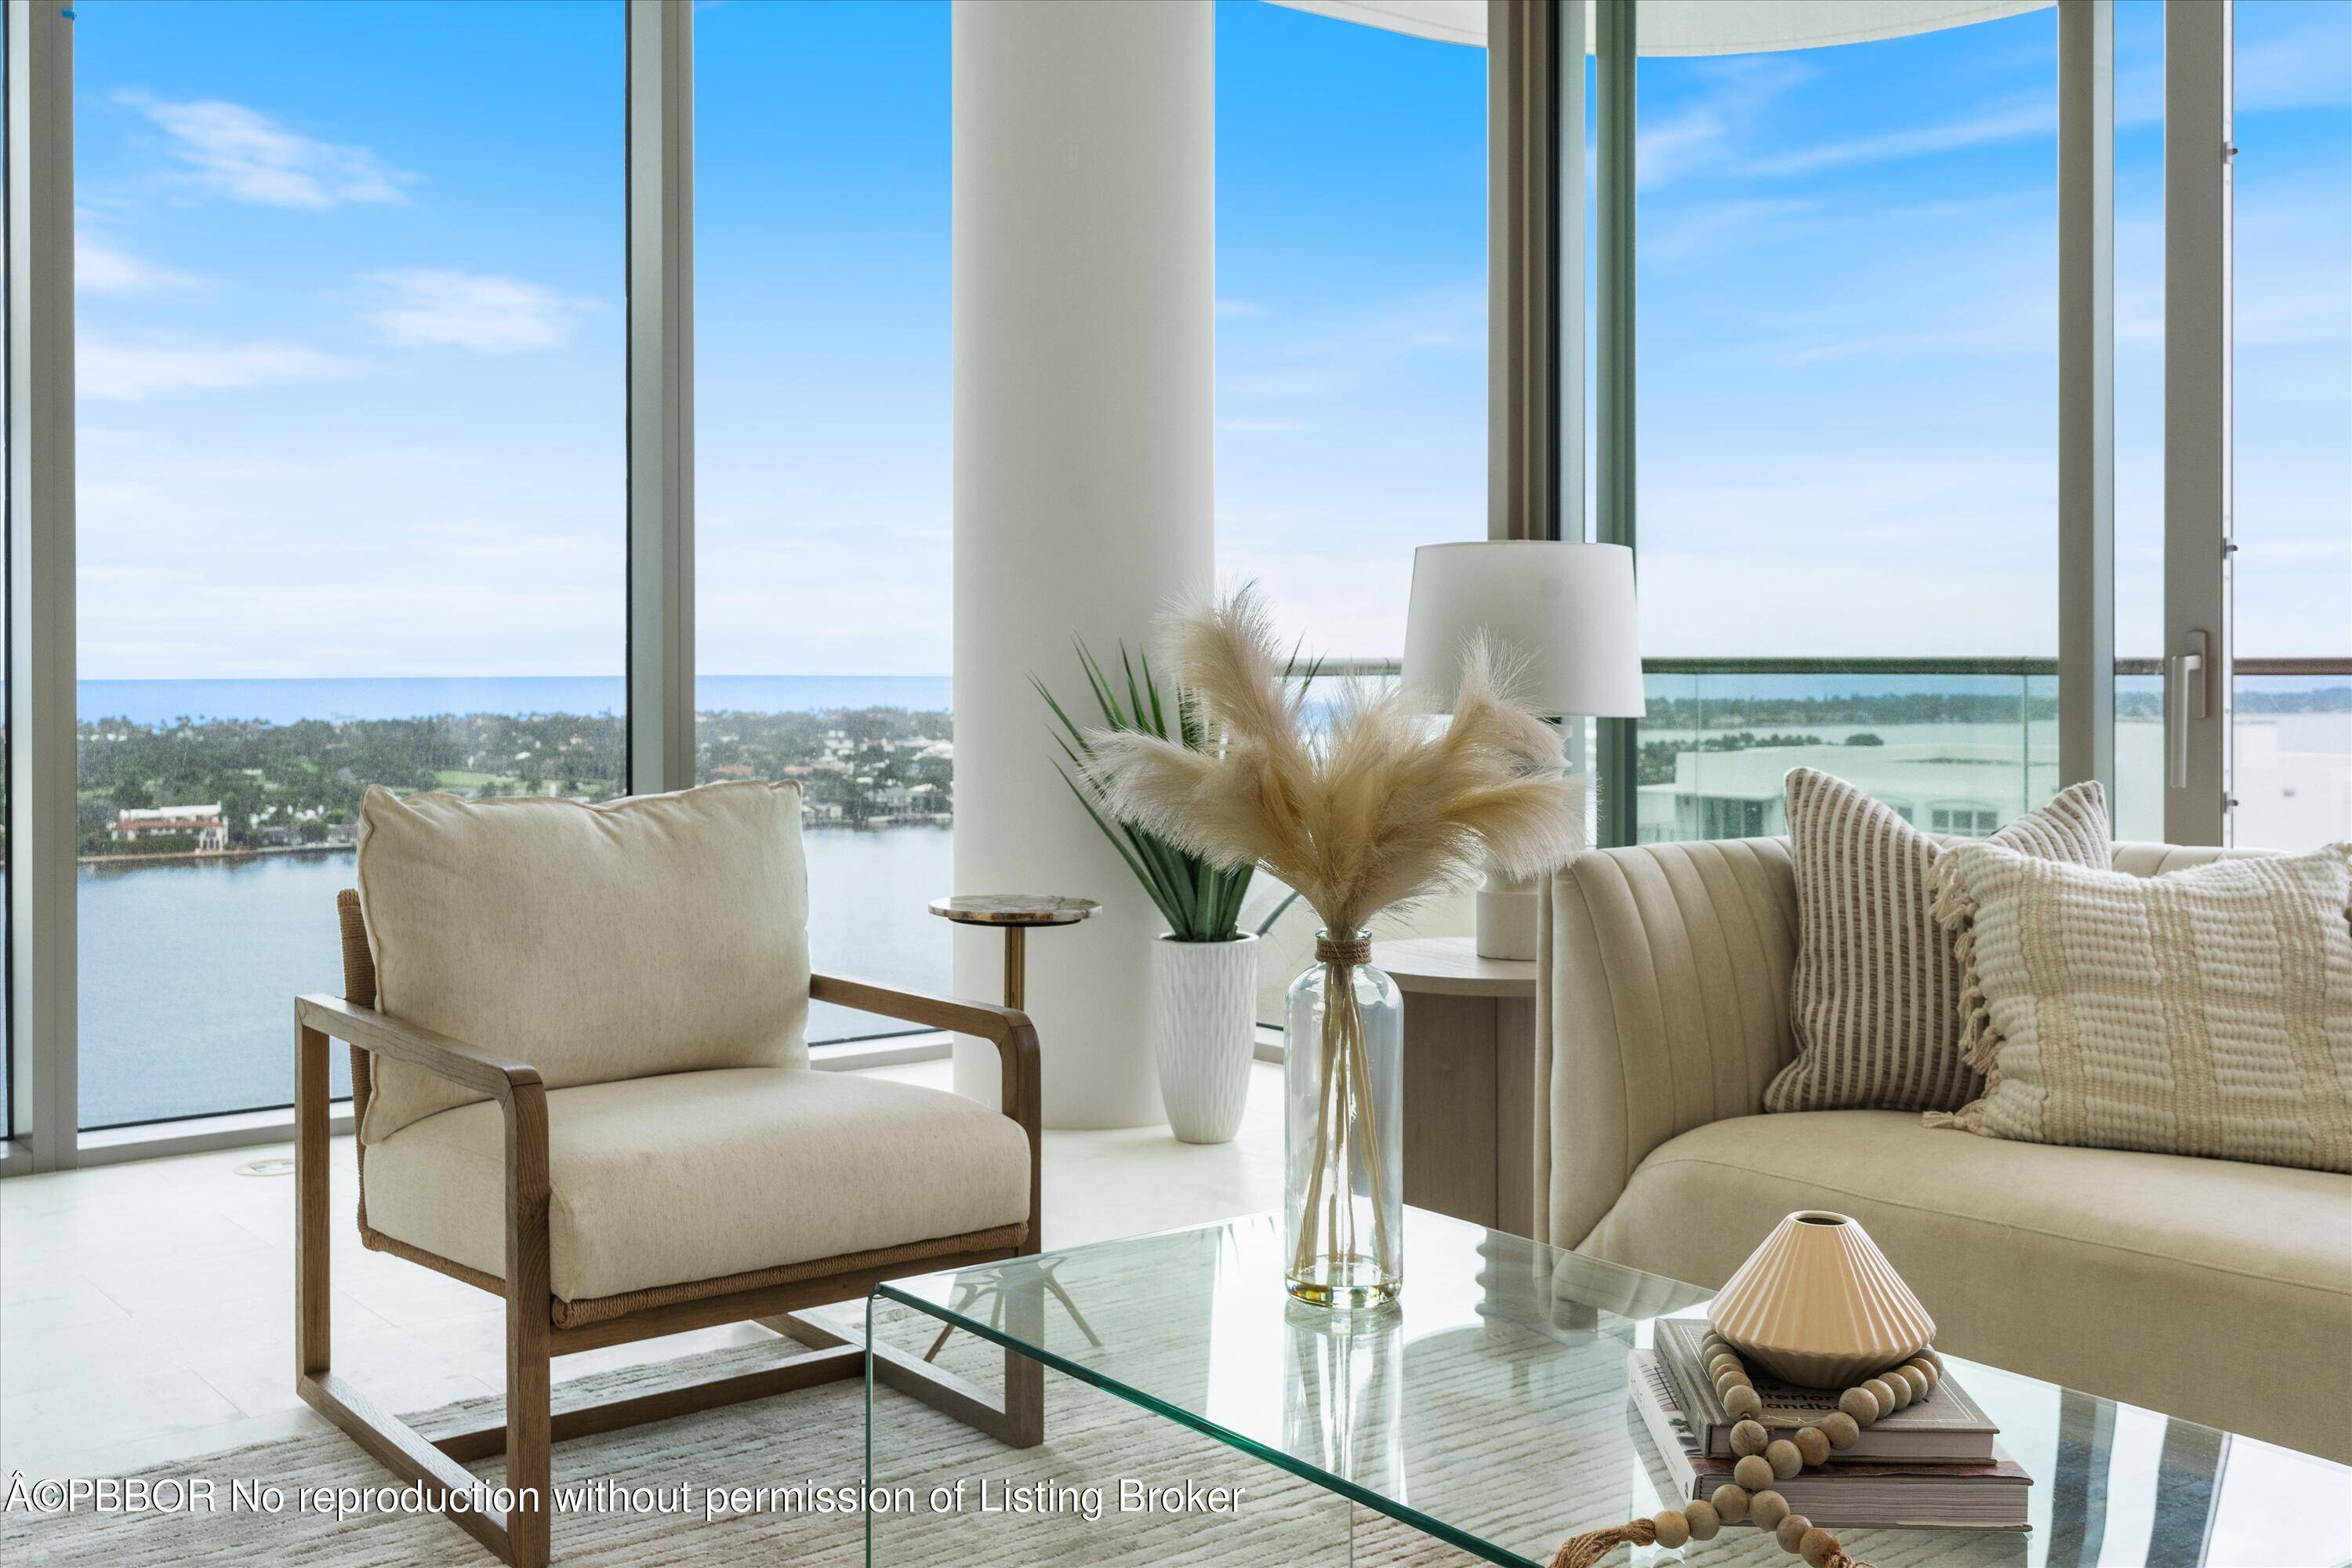 Panoramic intracoastal to ocean views overlooking the island of Palm Beach from the best priced, brand new 17th floor C model at La Clara.